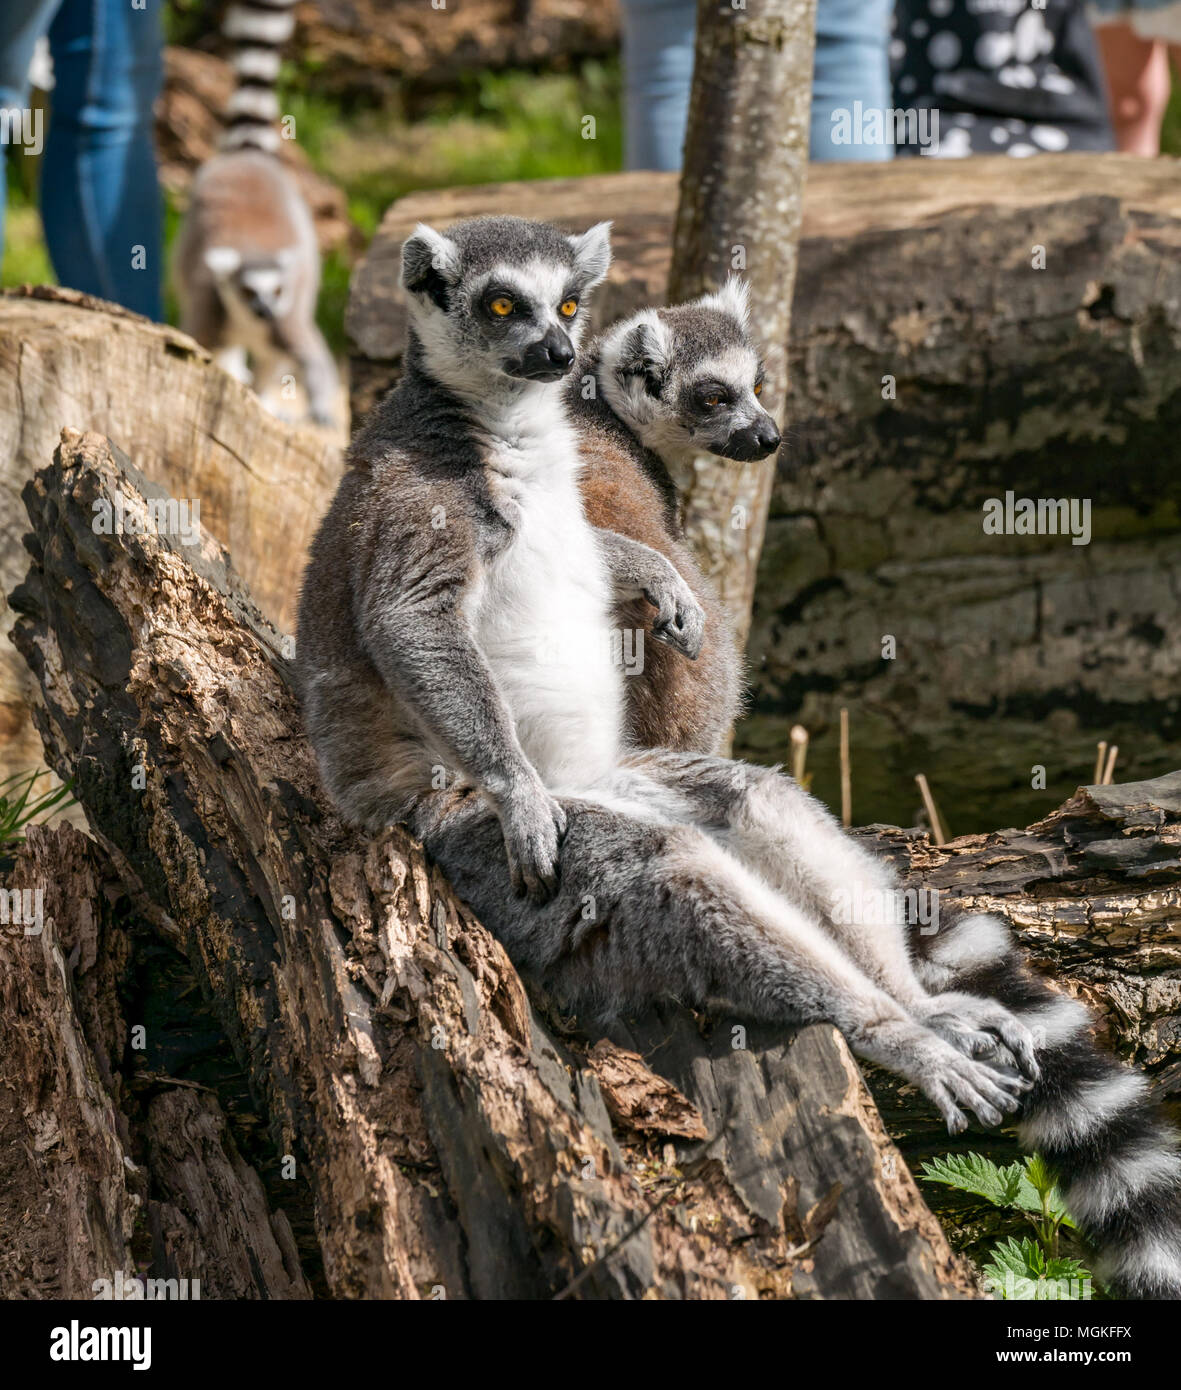 Close up of ring-tailed lemurs, Lemur catta, in a zoo, UK Stock Photo